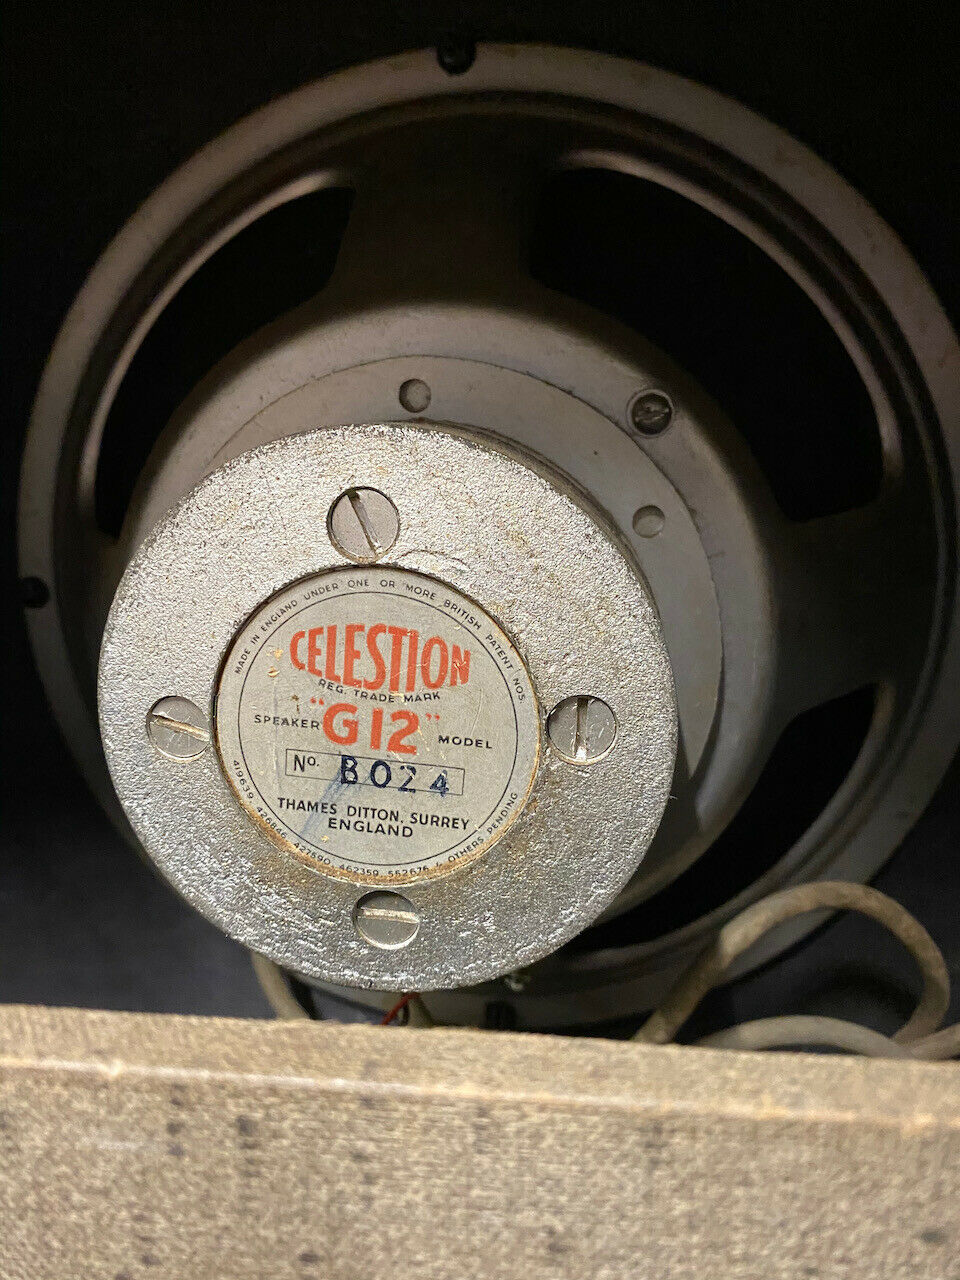 A Celestion B024 loaded into an early Vox AC15